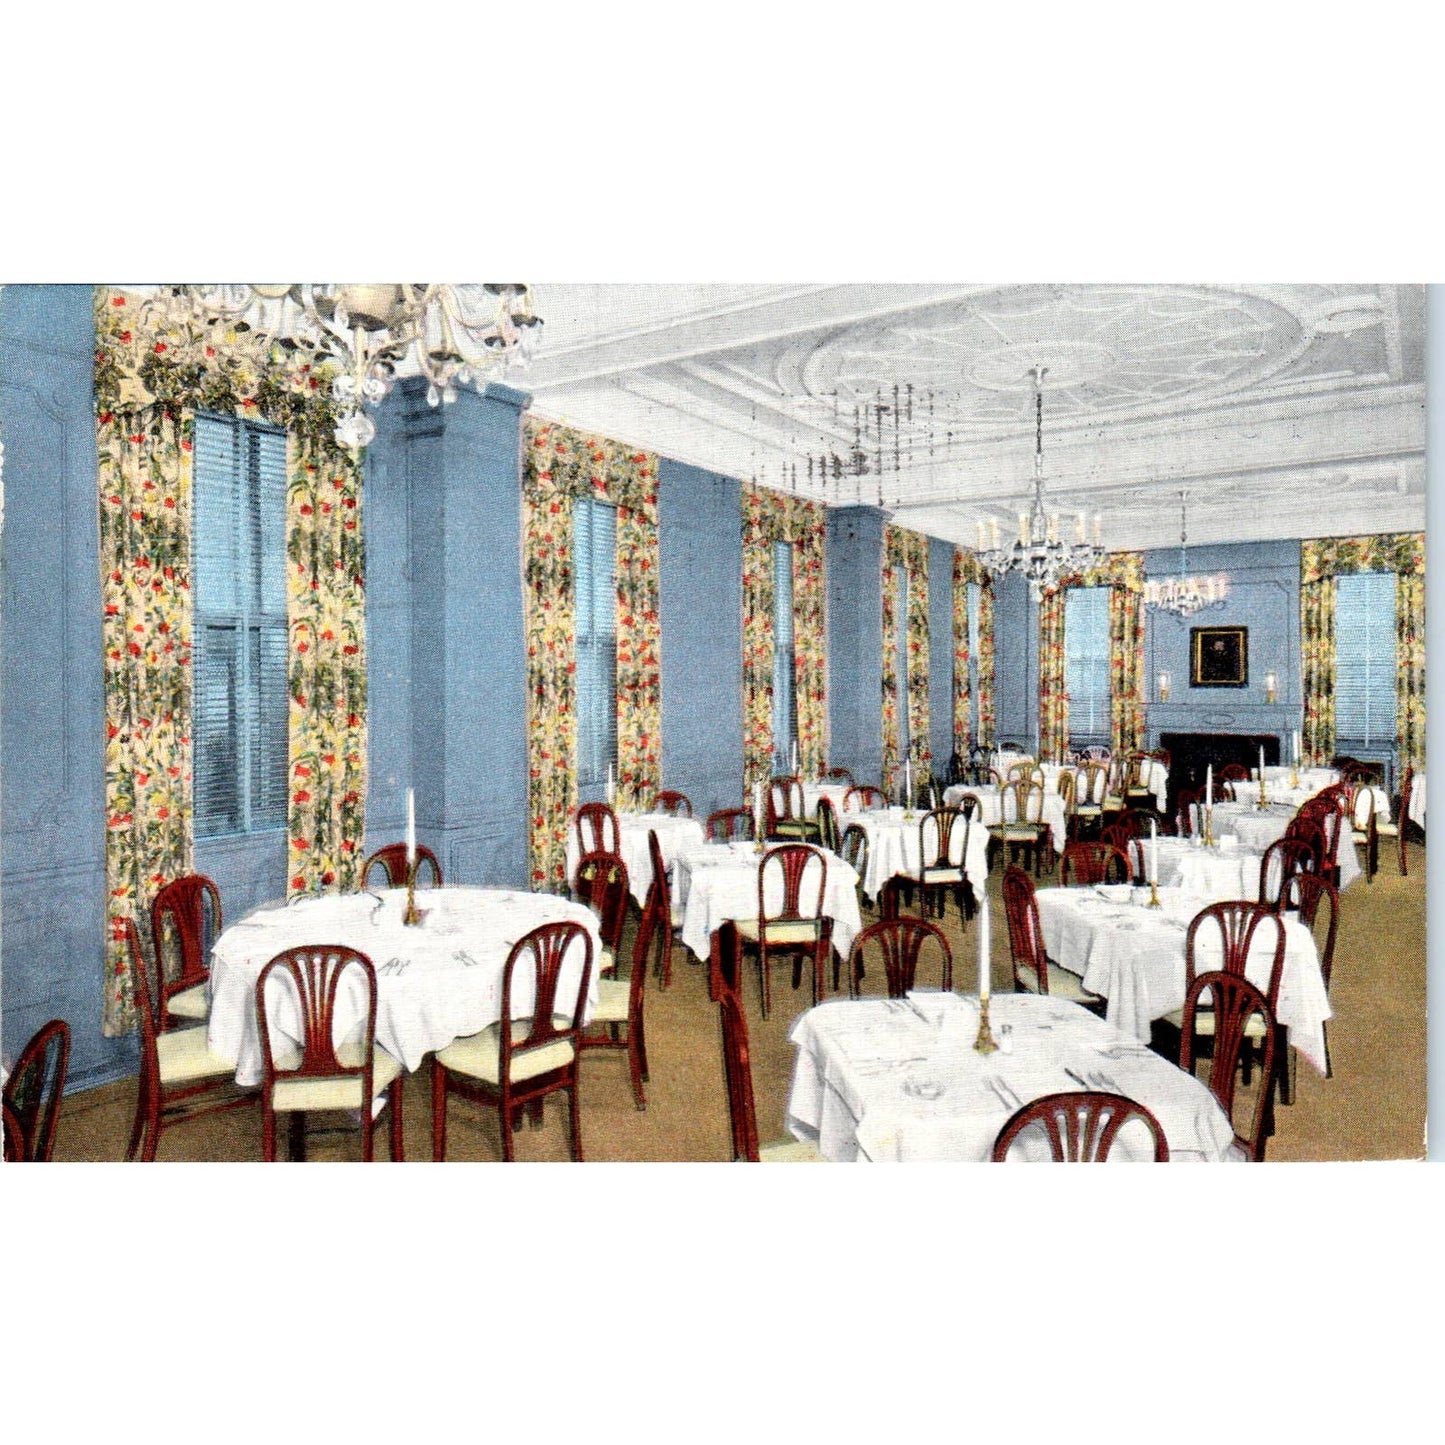 The Colonial Room Dining Room Hotel Wisconsin Milwaukee 1948 Postcard TJ9-P3